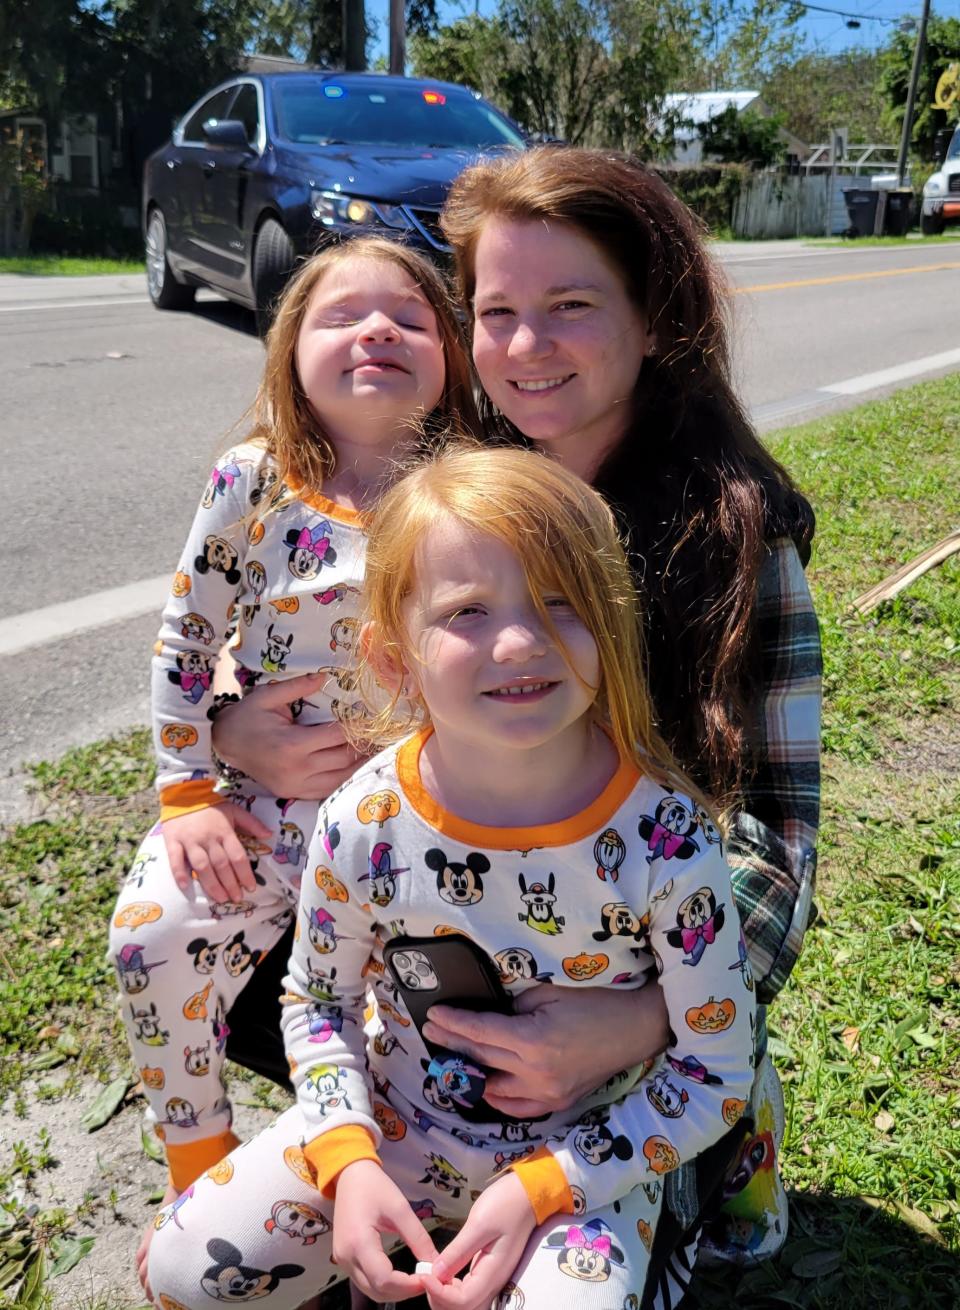 Tiffany Ketchmark poses with her daughters, Jade and Jailyn, at her father's house in Lakeland. Ketchmark evacuated her apartment in Fort Myers and said it was flooded by Hurricane Ian.